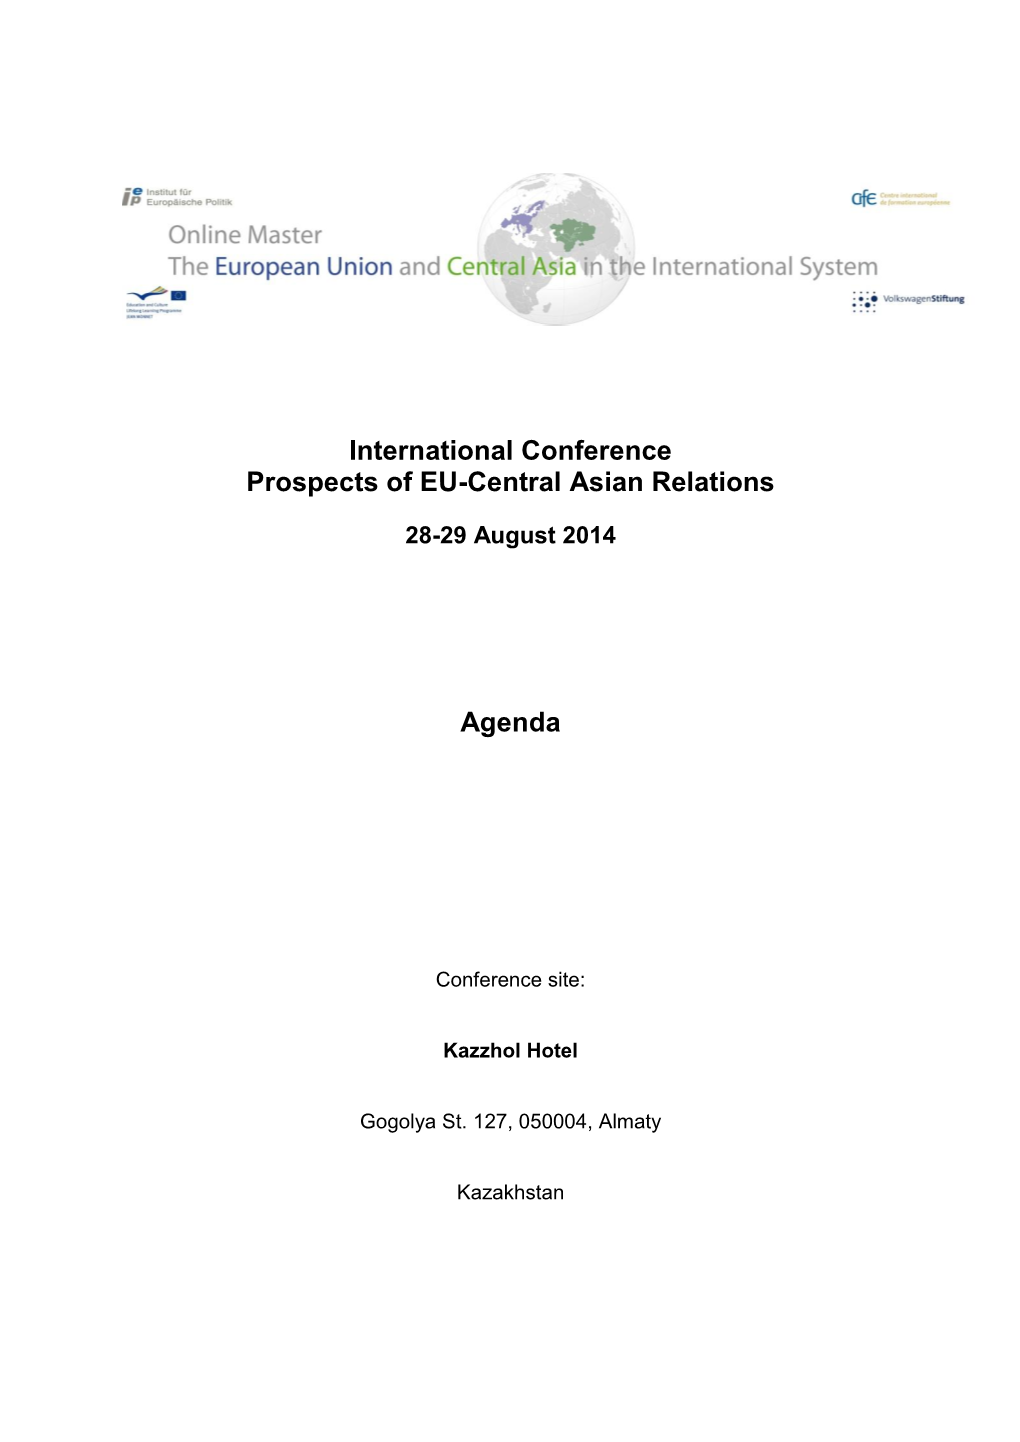 International Conference Prospects of EU-Central Asian Relations Agenda